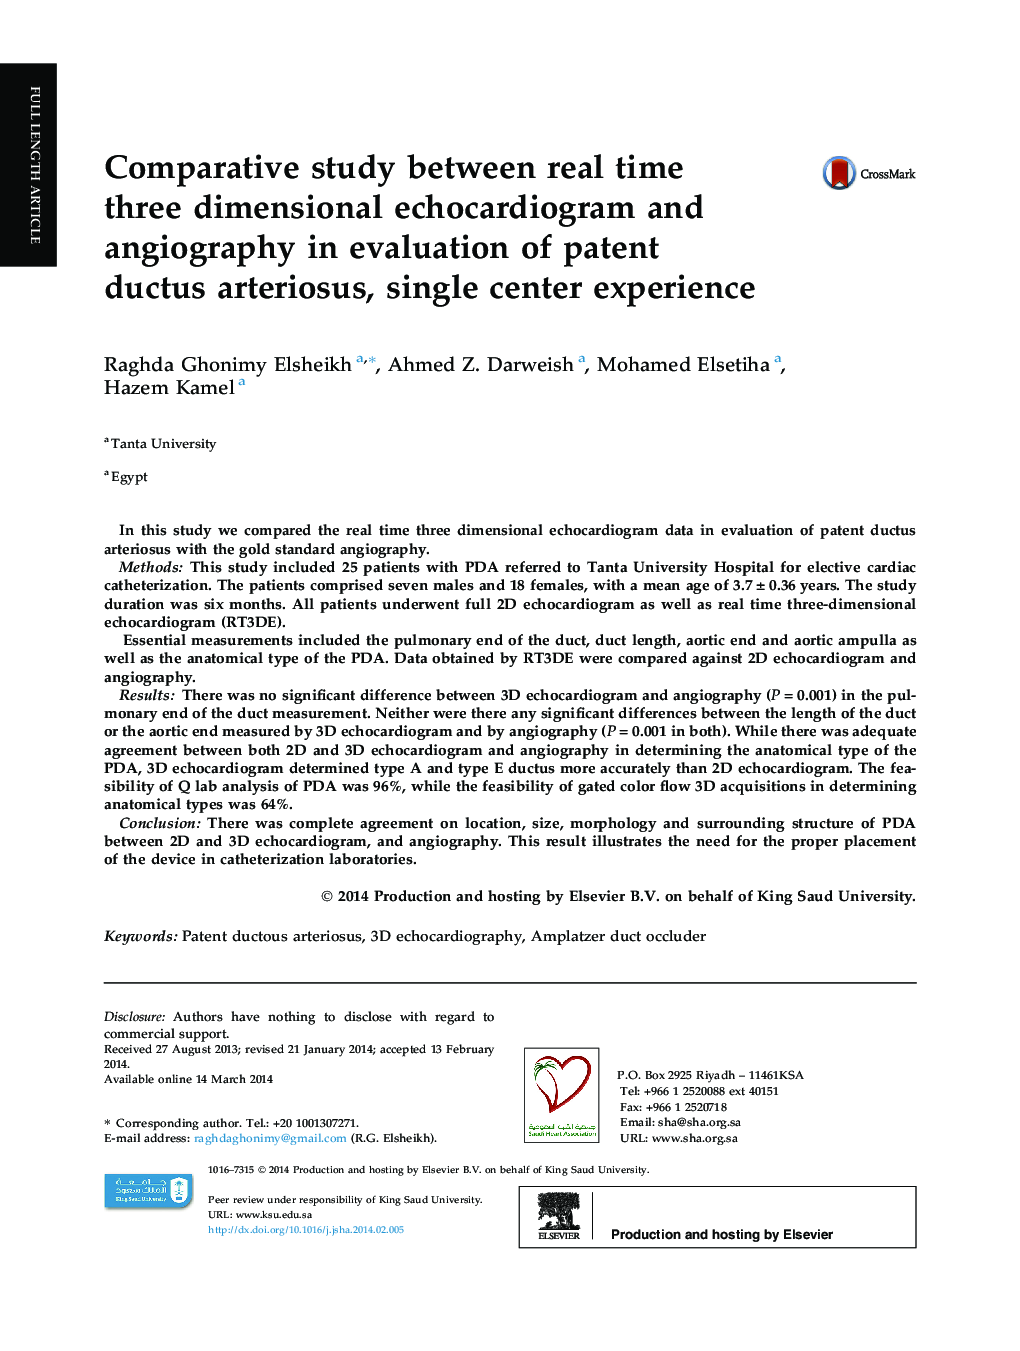 Comparative study between real time three dimensional echocardiogram and angiography in evaluation of patent ductus arteriosus, single center experience 